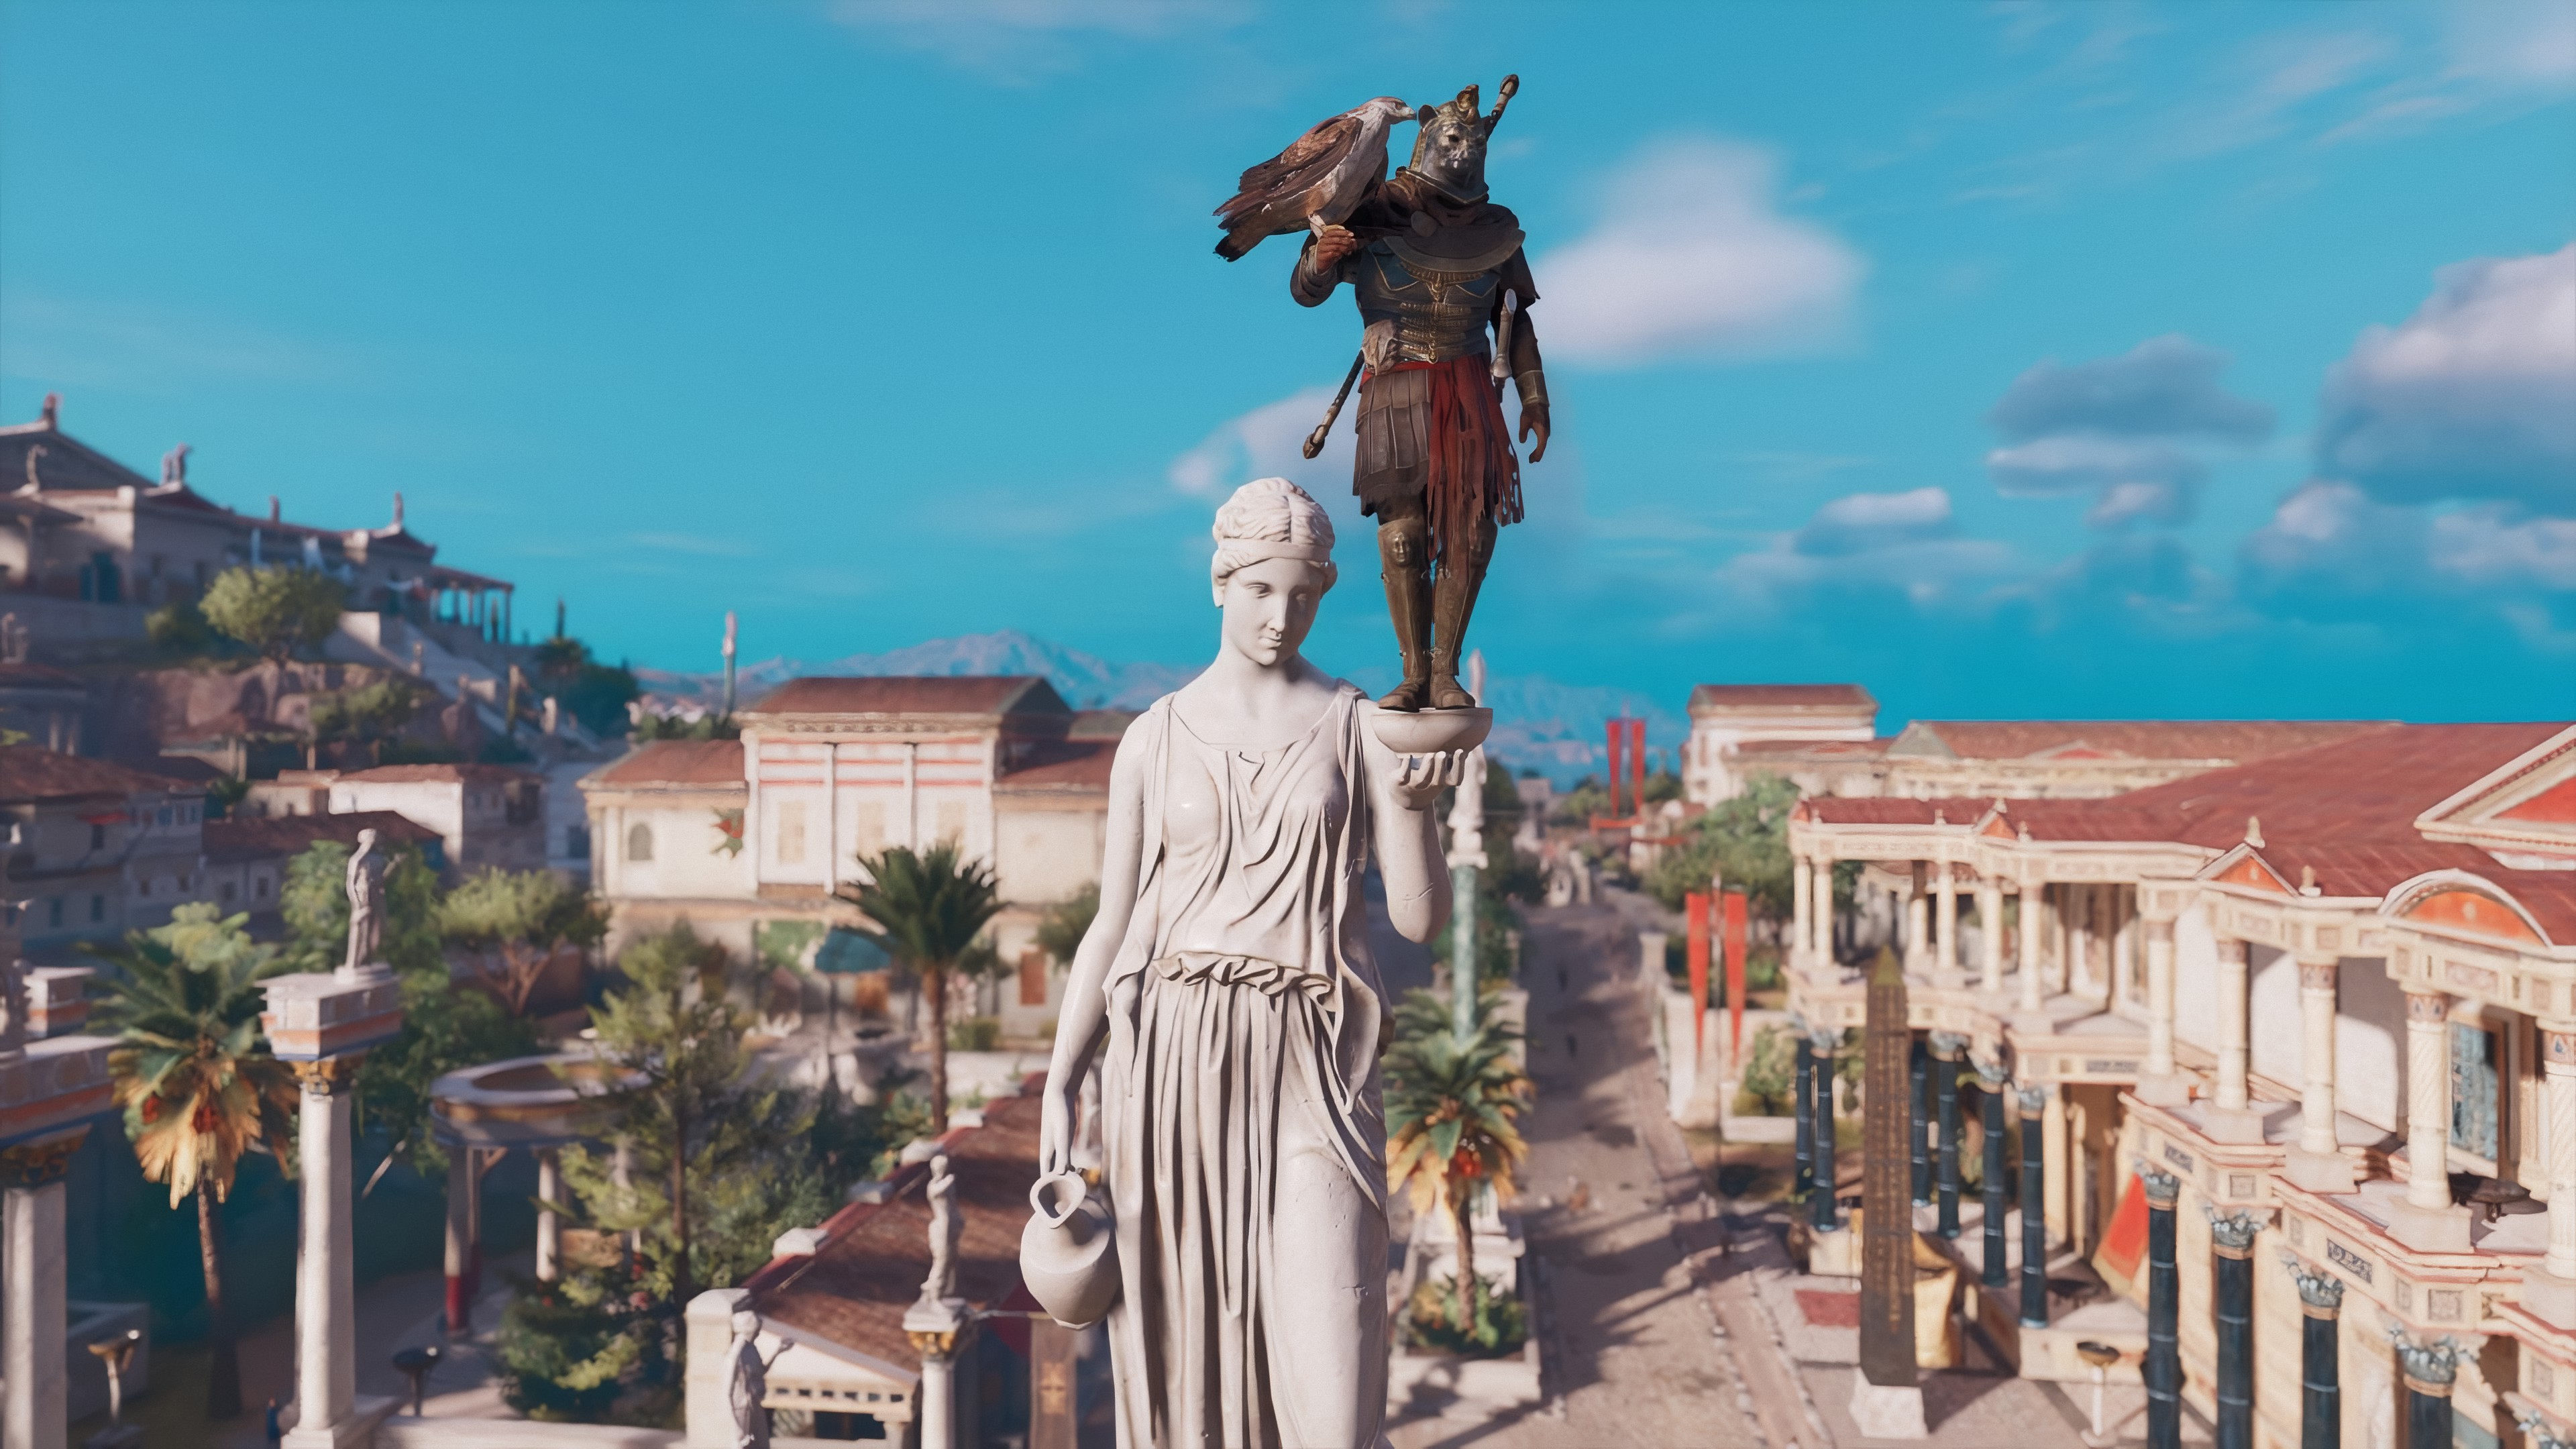 General 3840x2160 Assassin's Creed: Origins Bayek video games Egypt screen shot video game characters video game landscape Alexandria Ubisoft Assassin's Creed